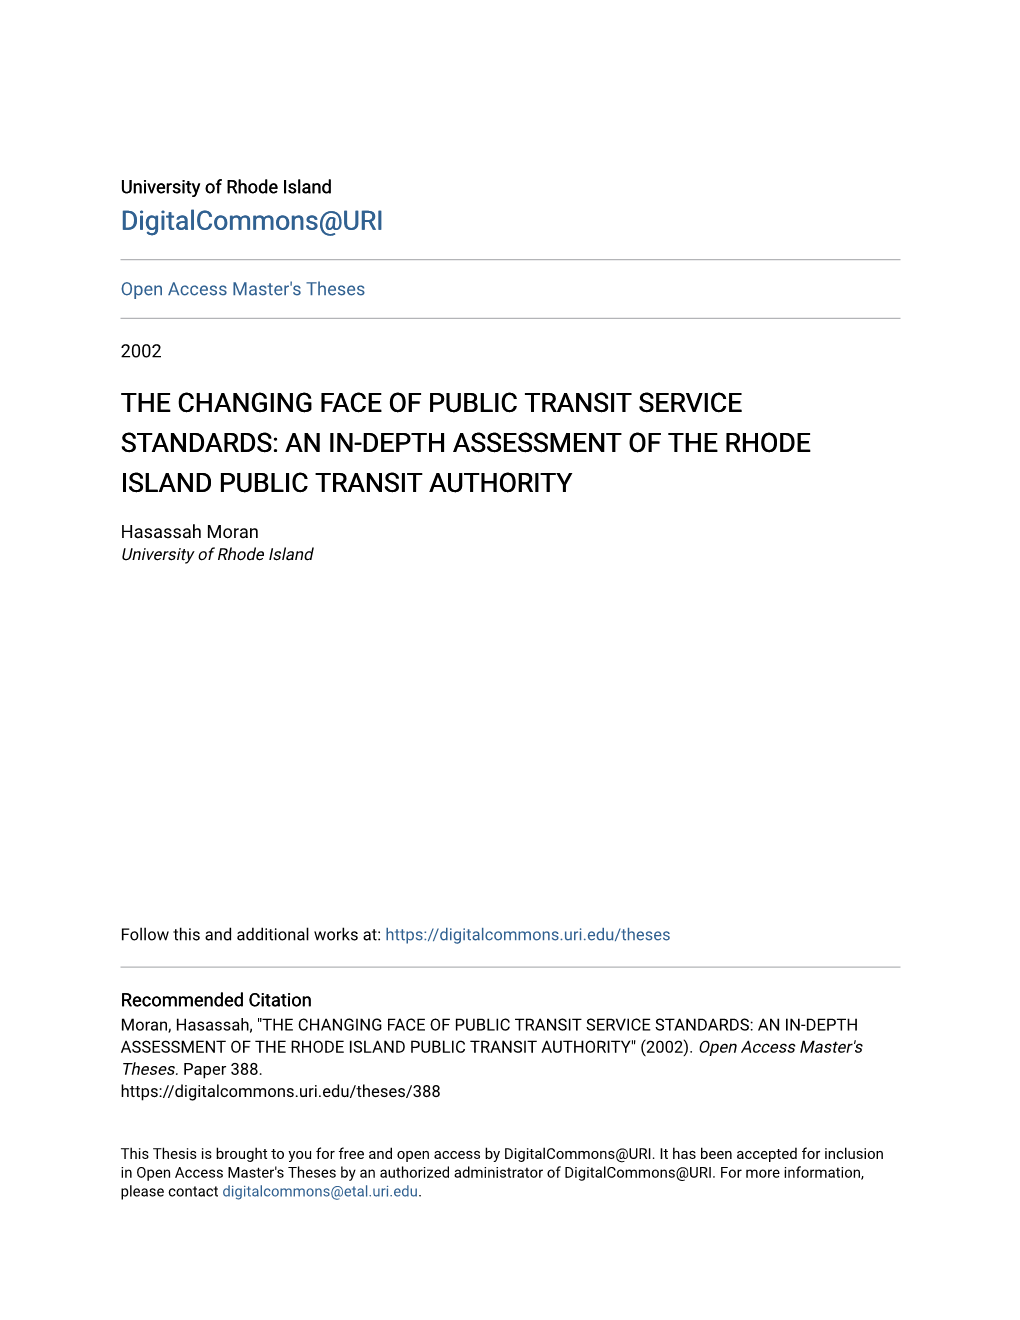 An In-Depth Assessment of the Rhode Island Public Transit Authority